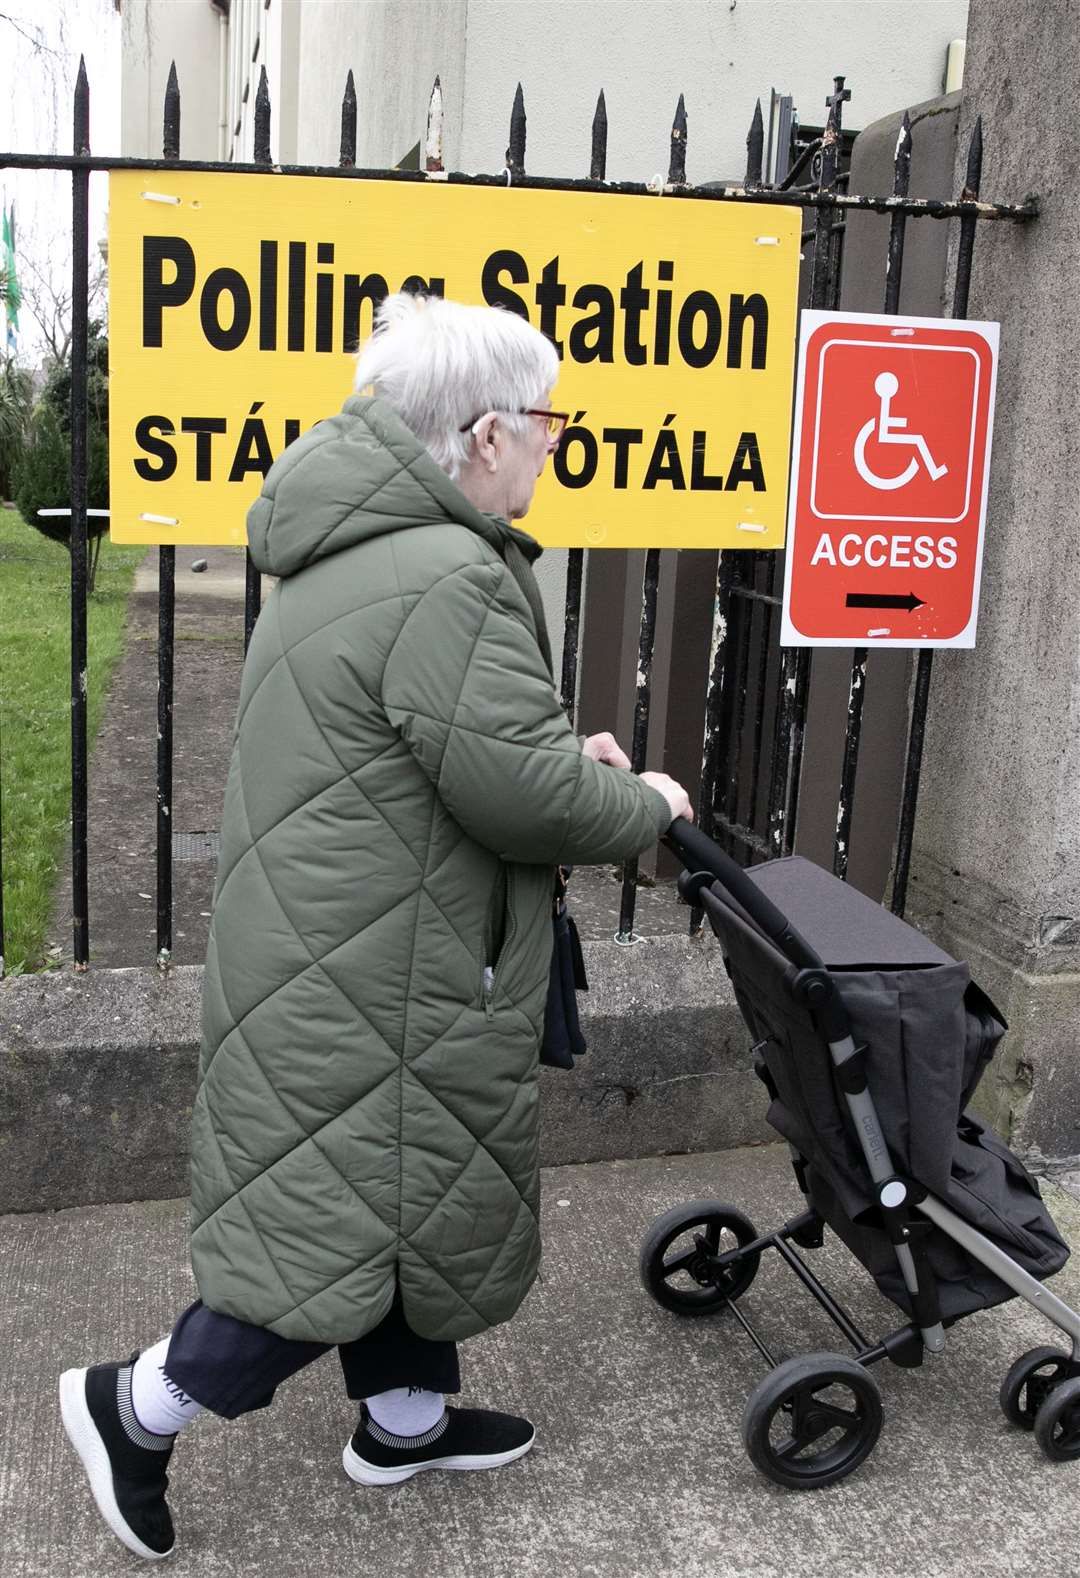 Members of the public arrive at a polling station in Dublin (Gareth Chaney/PA)